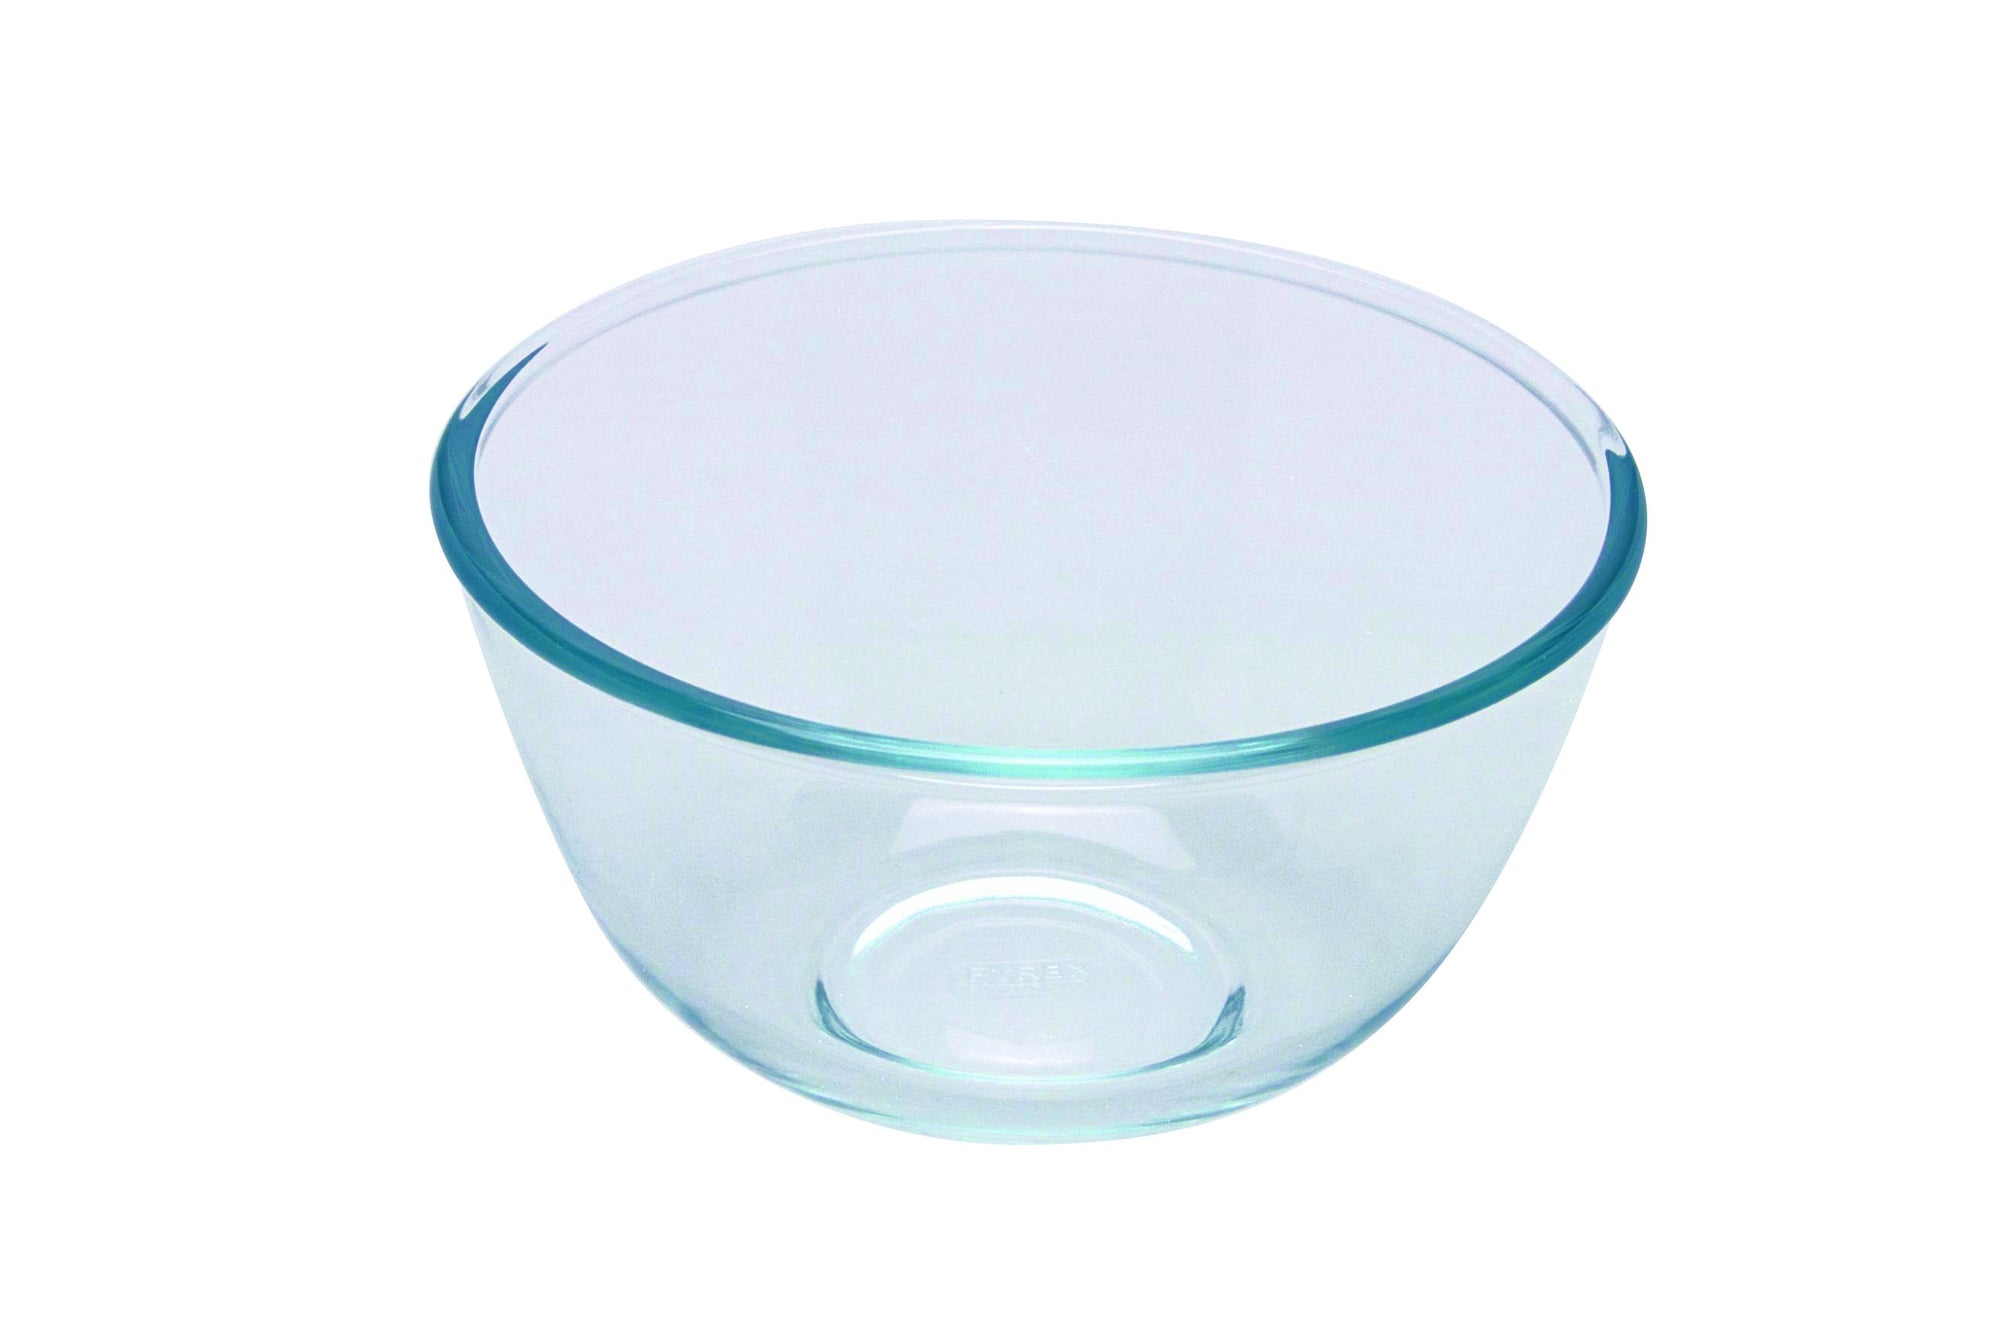 What are the temperature limits for Pyrex glassware?